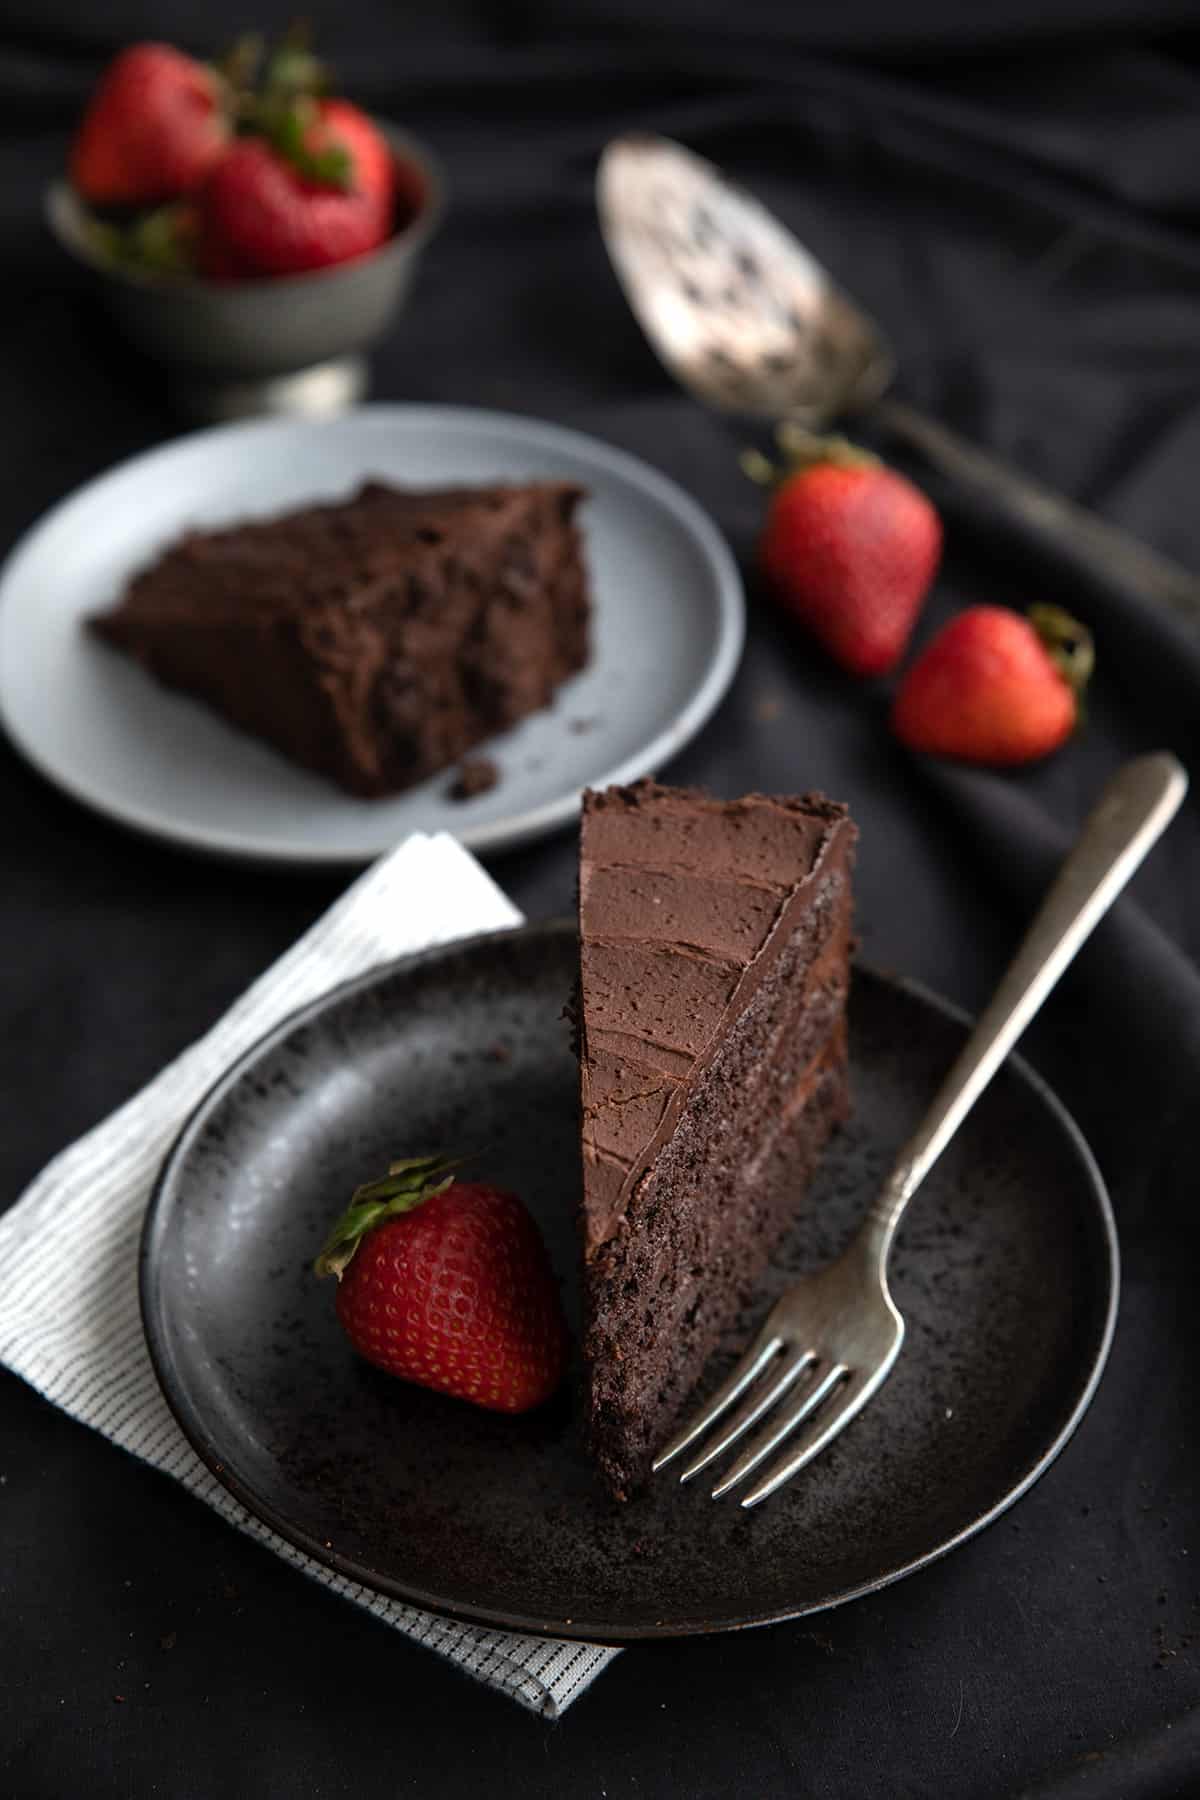 A slice of keto chocolate cake on a black plate with a strawberry and a fork.